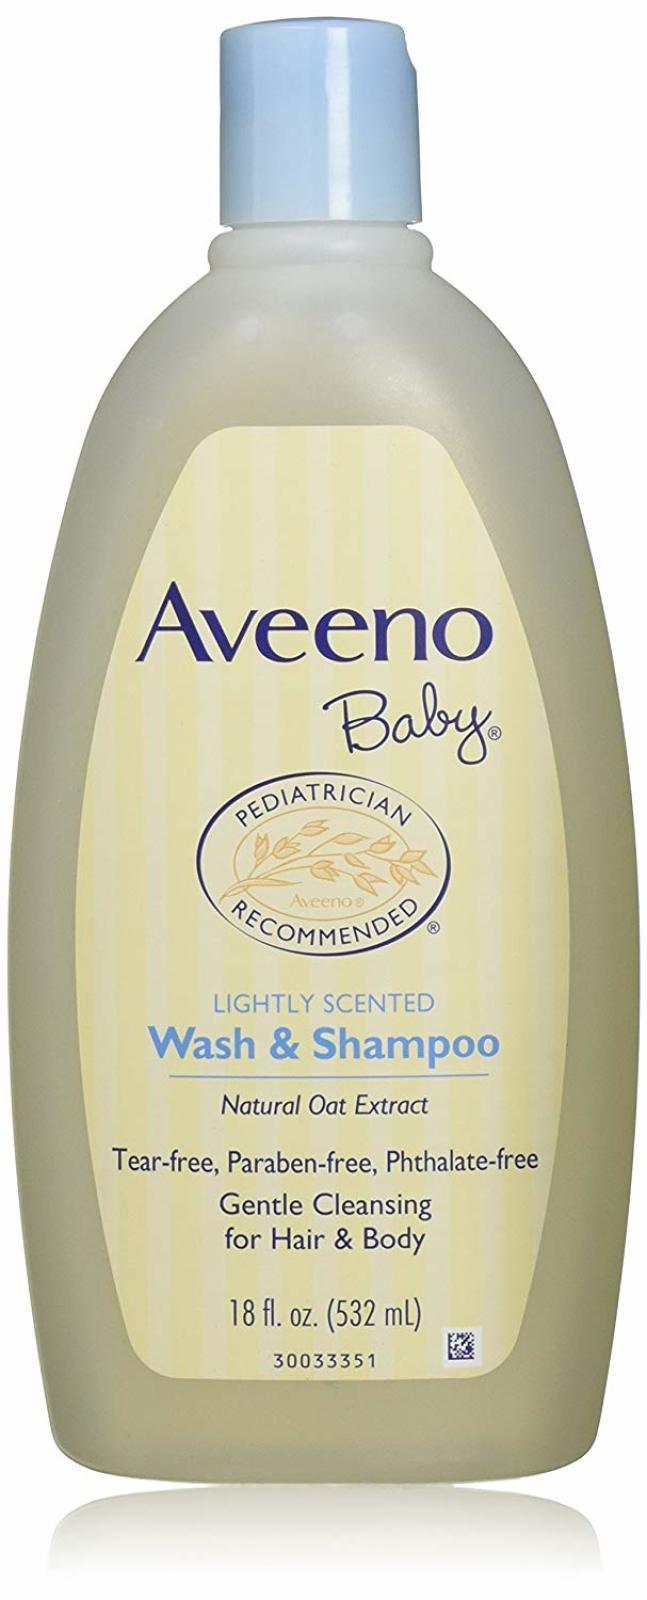 Aveeno Baby Wash and Shampoo for Hair & Body Lightly Scented 8 Ounce Bottle New